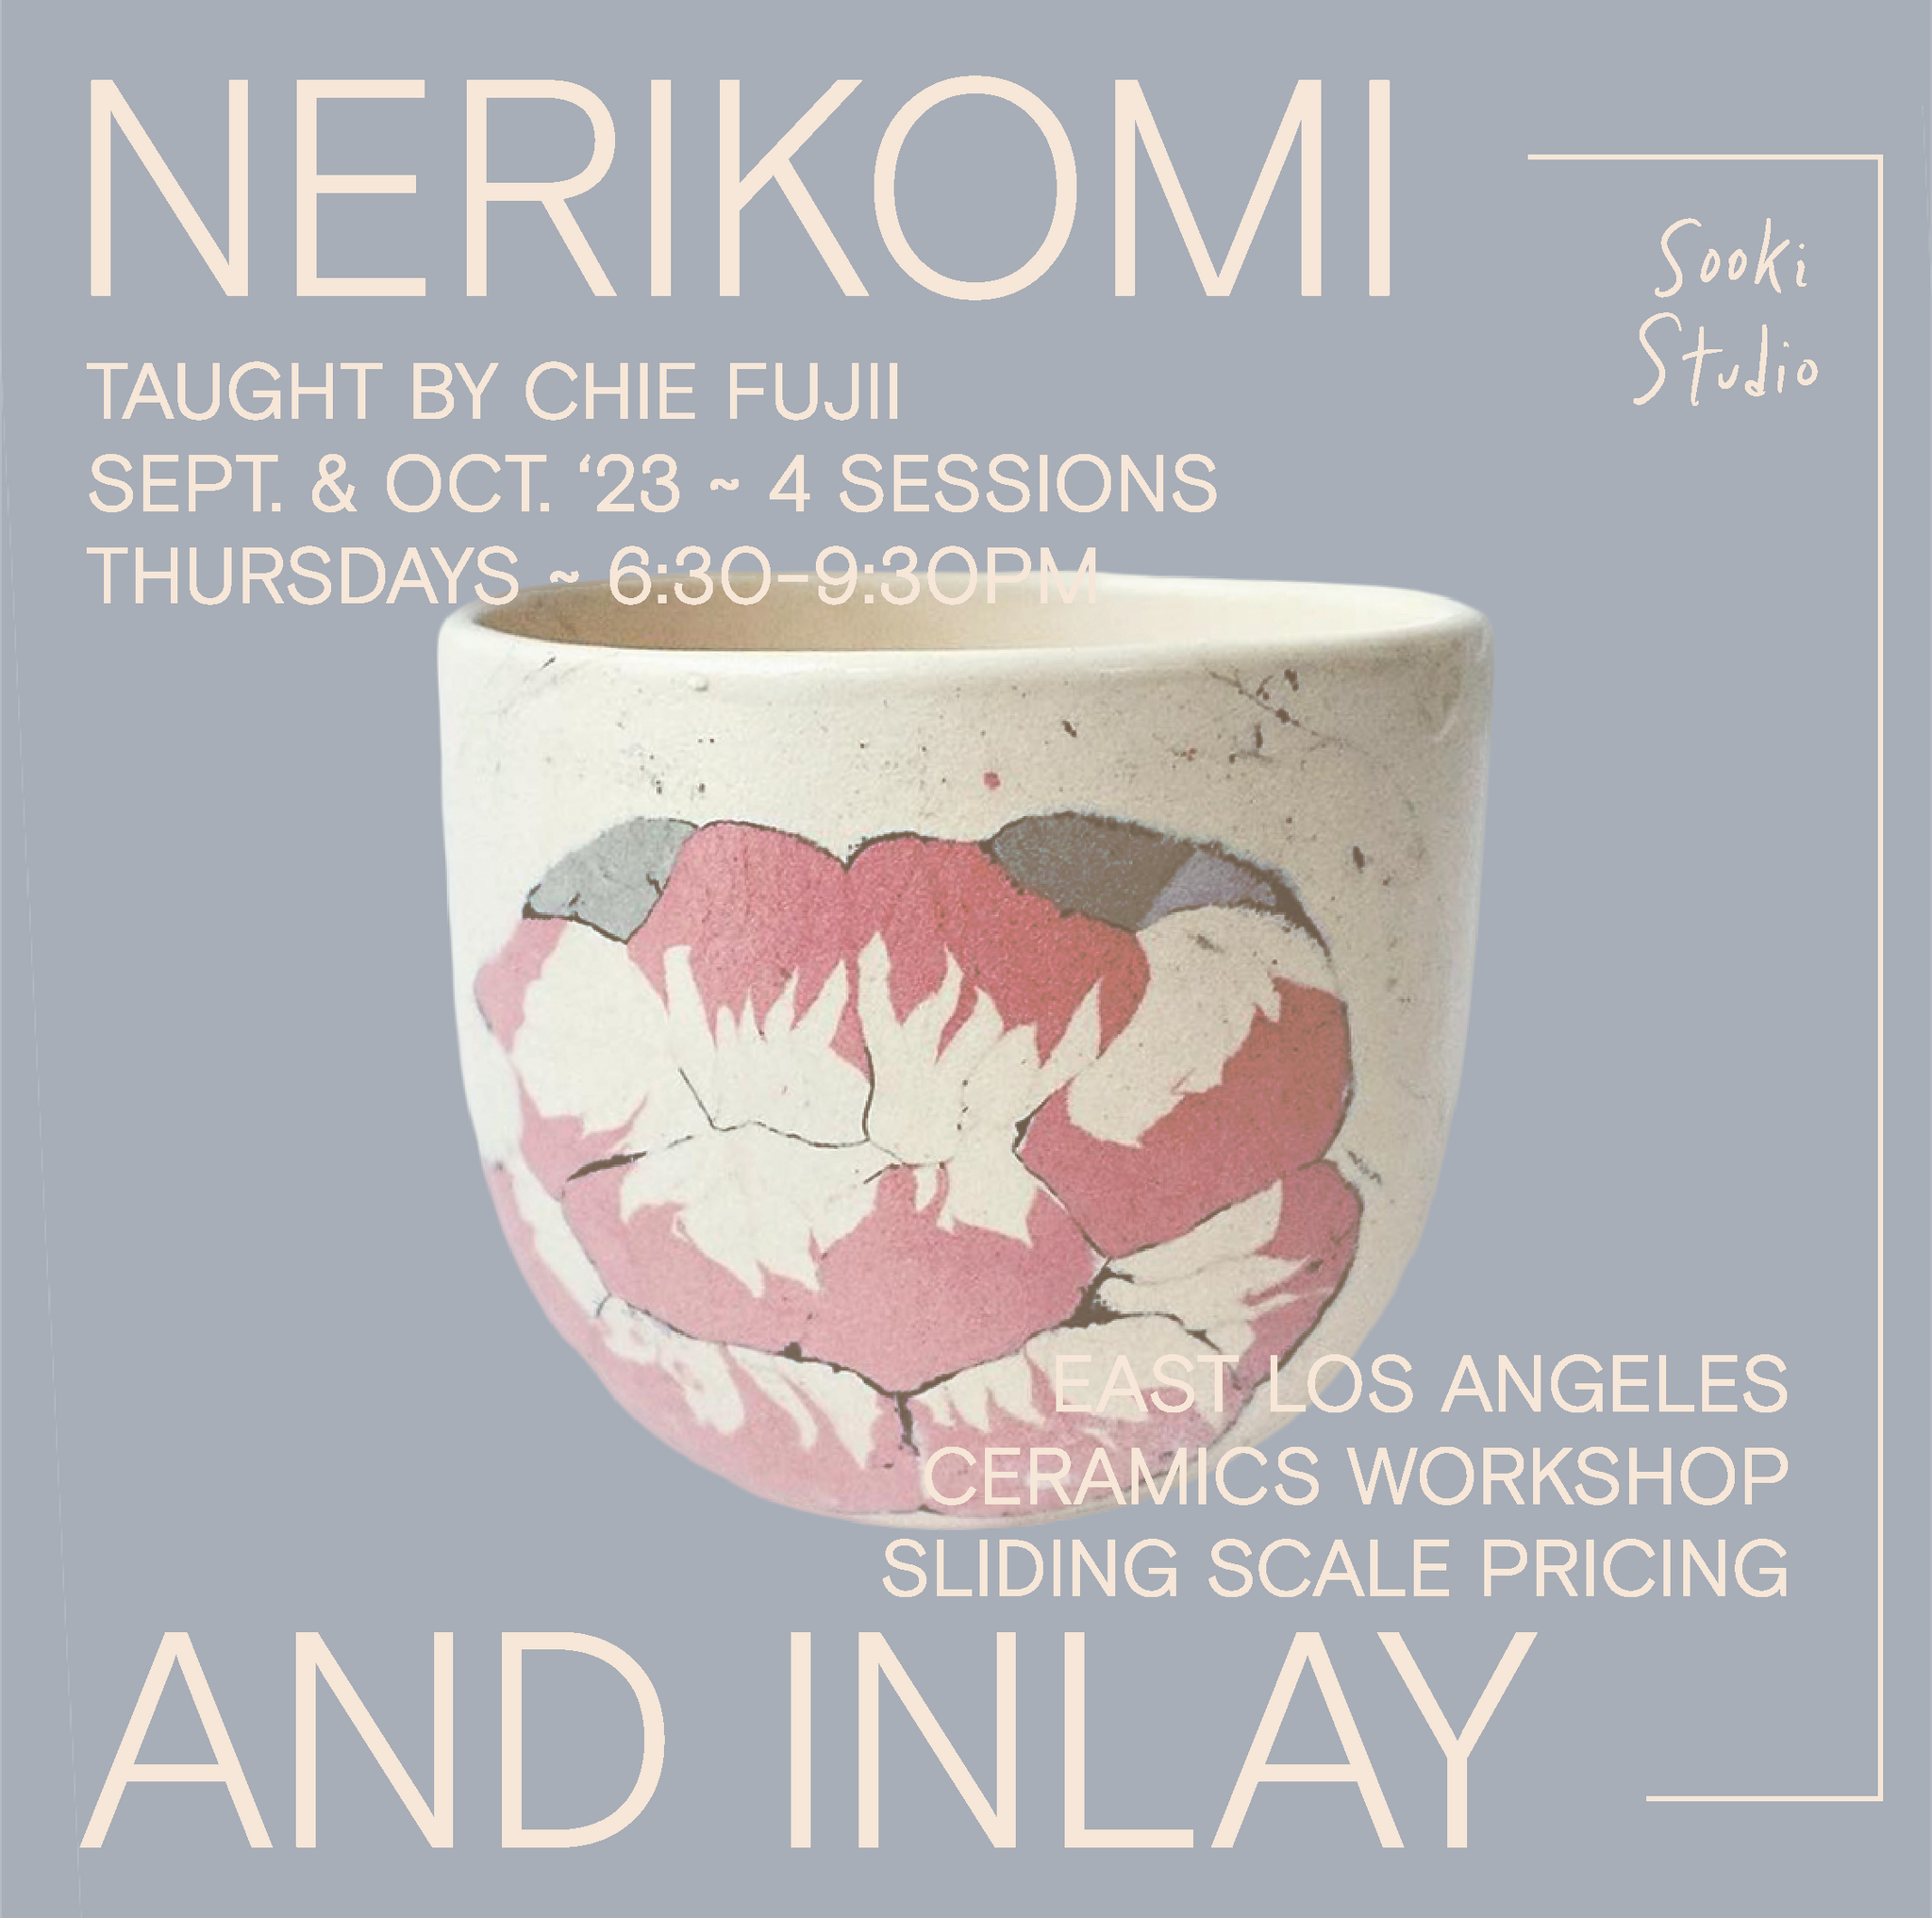 Nerikomi and Inlay with Chie Fujii - Sept. + Oct.